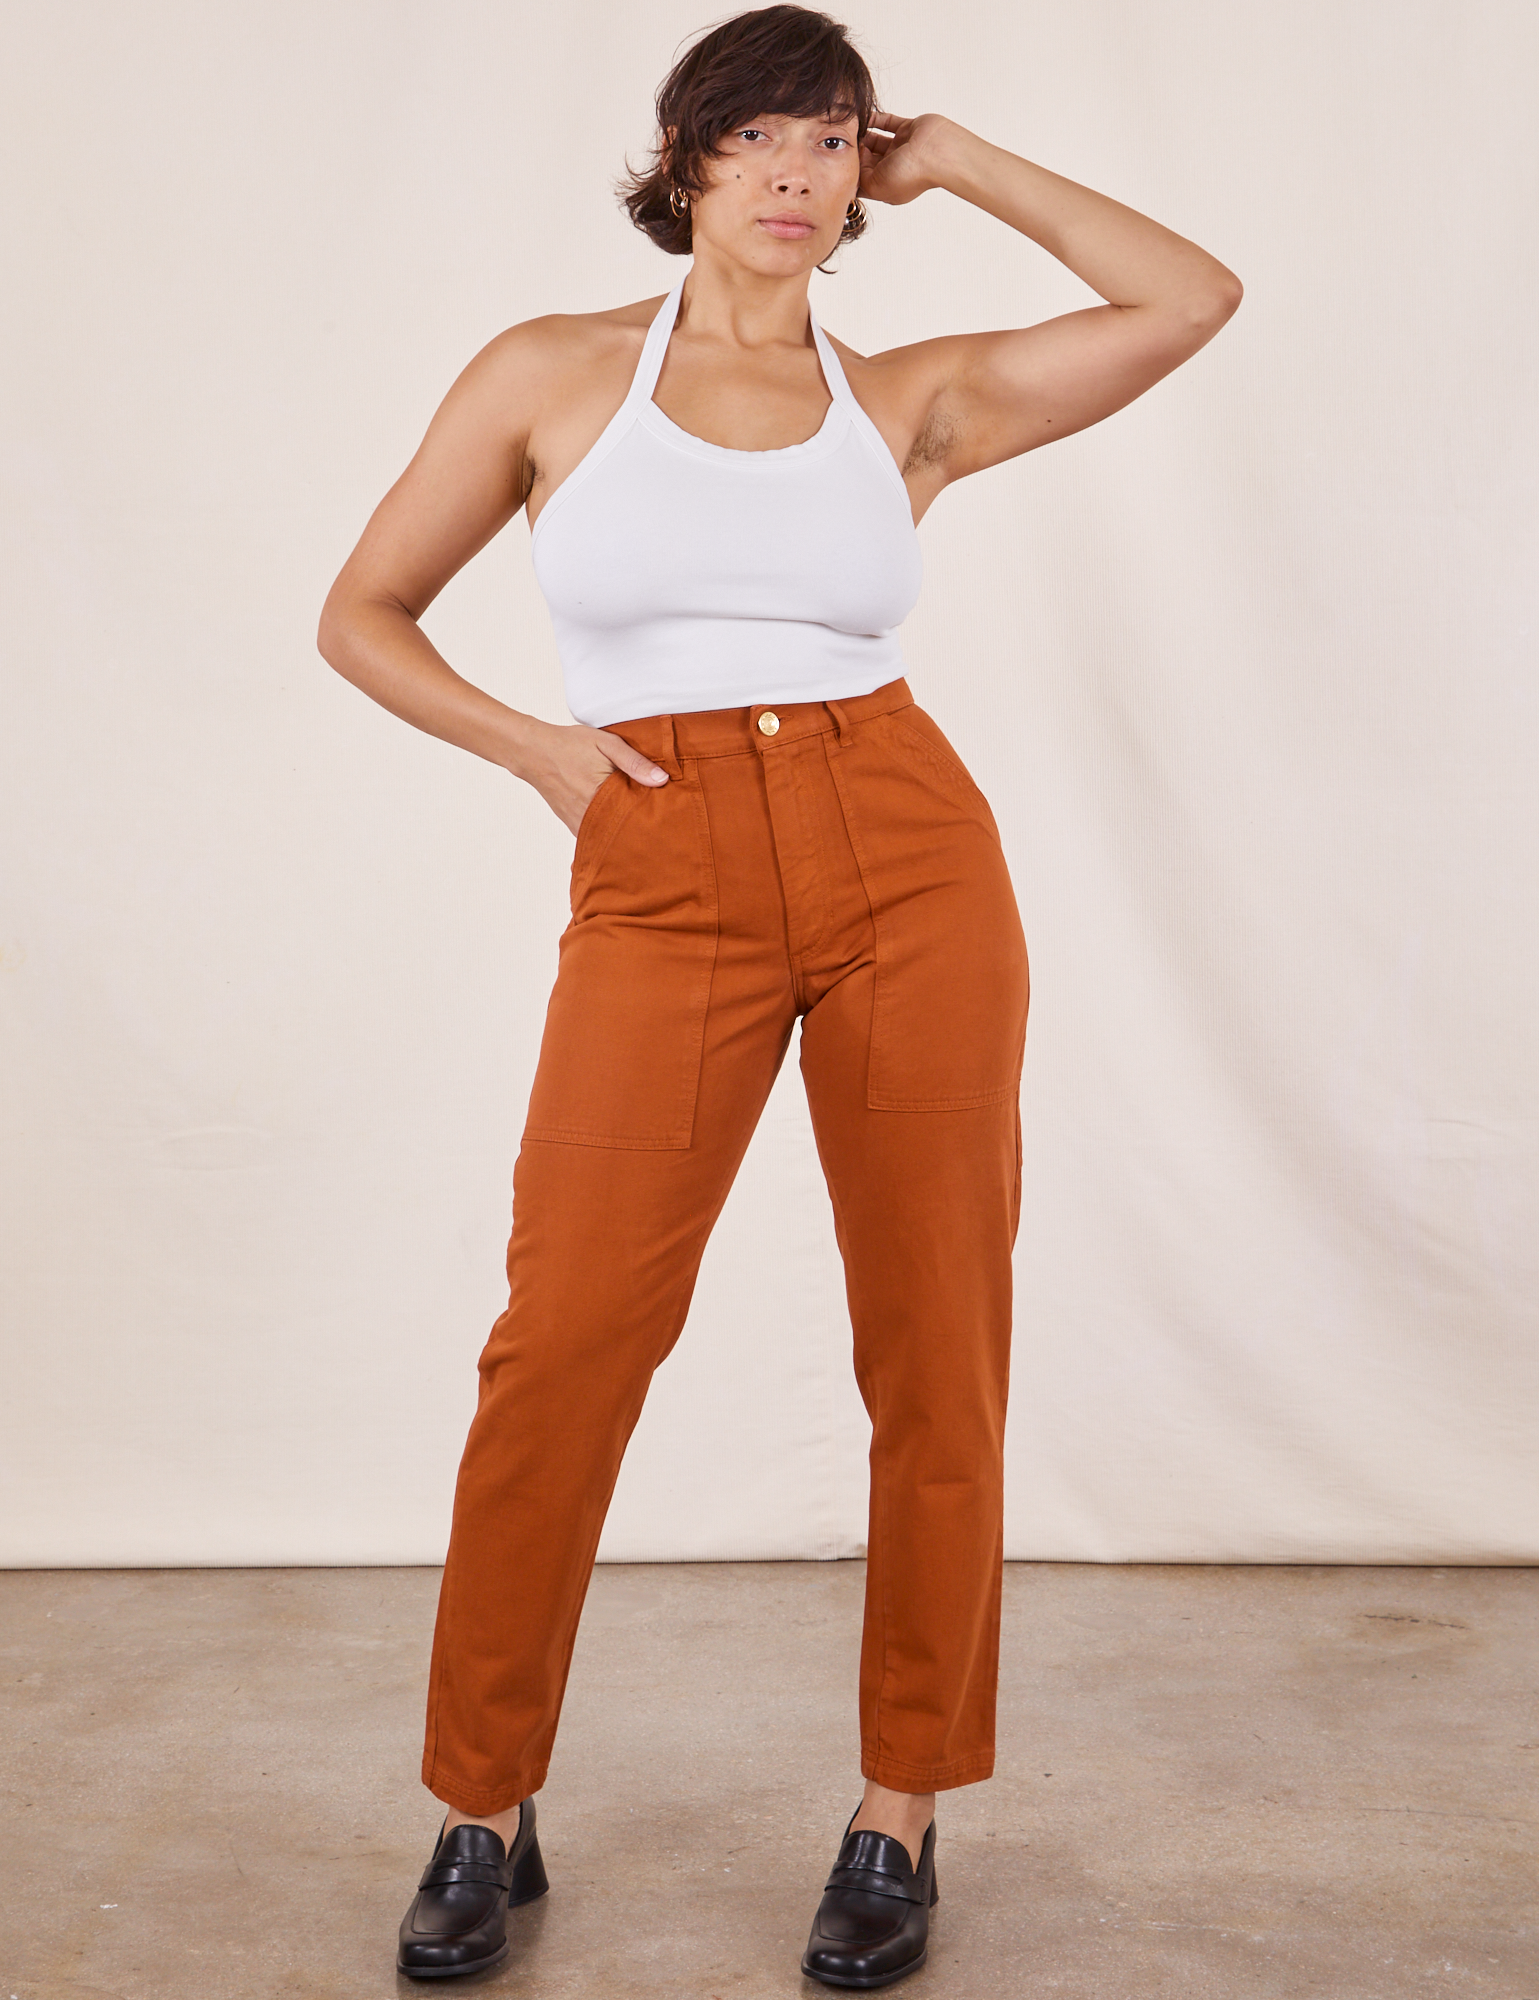 Tiara is 5'4" and wearing XS Pencil Pants in Burnt Terracotta paired with vintage off-white Halter Top